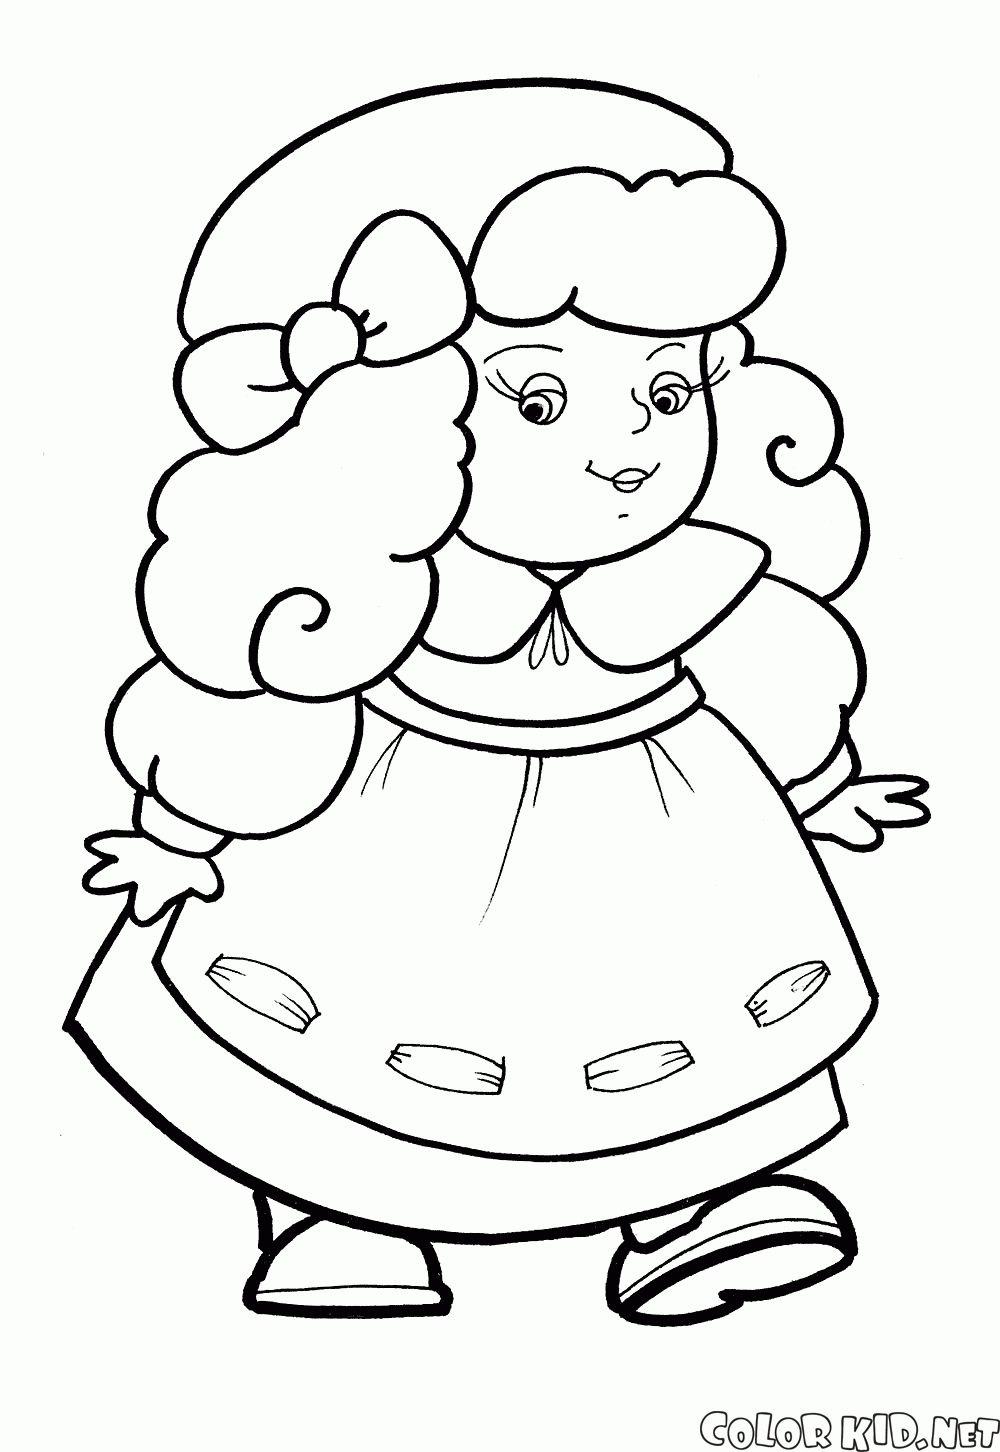 Coloring page - Rabbit with carrot